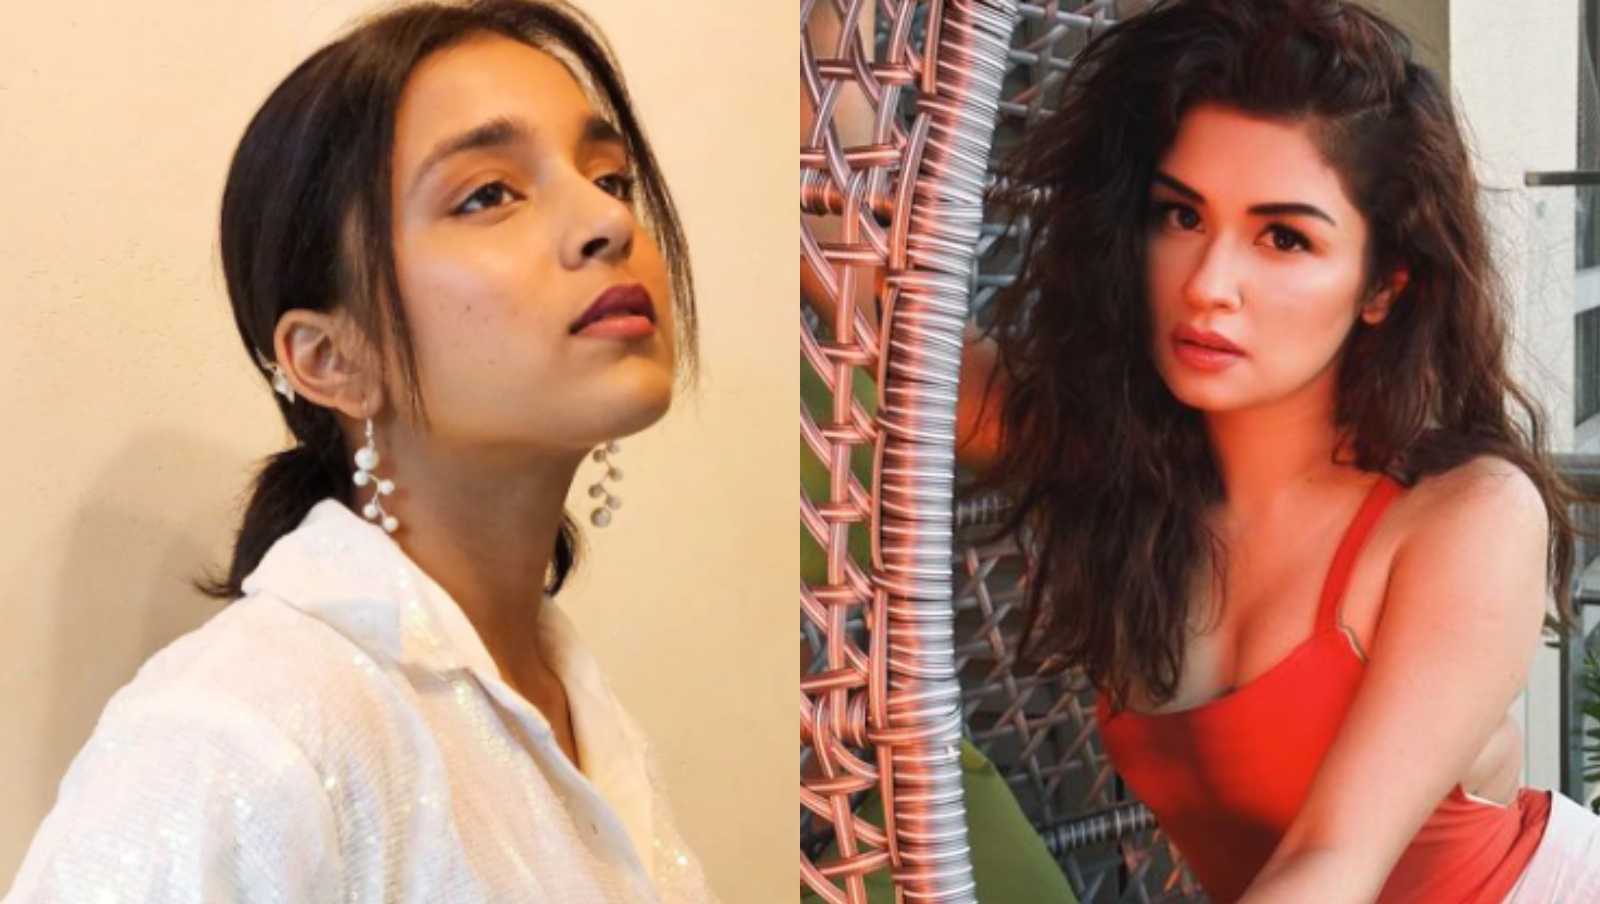 Sumbul Touqeer Khan, Avneet Kaur: These showbiz beauties are already superstars in the making at a tender age 